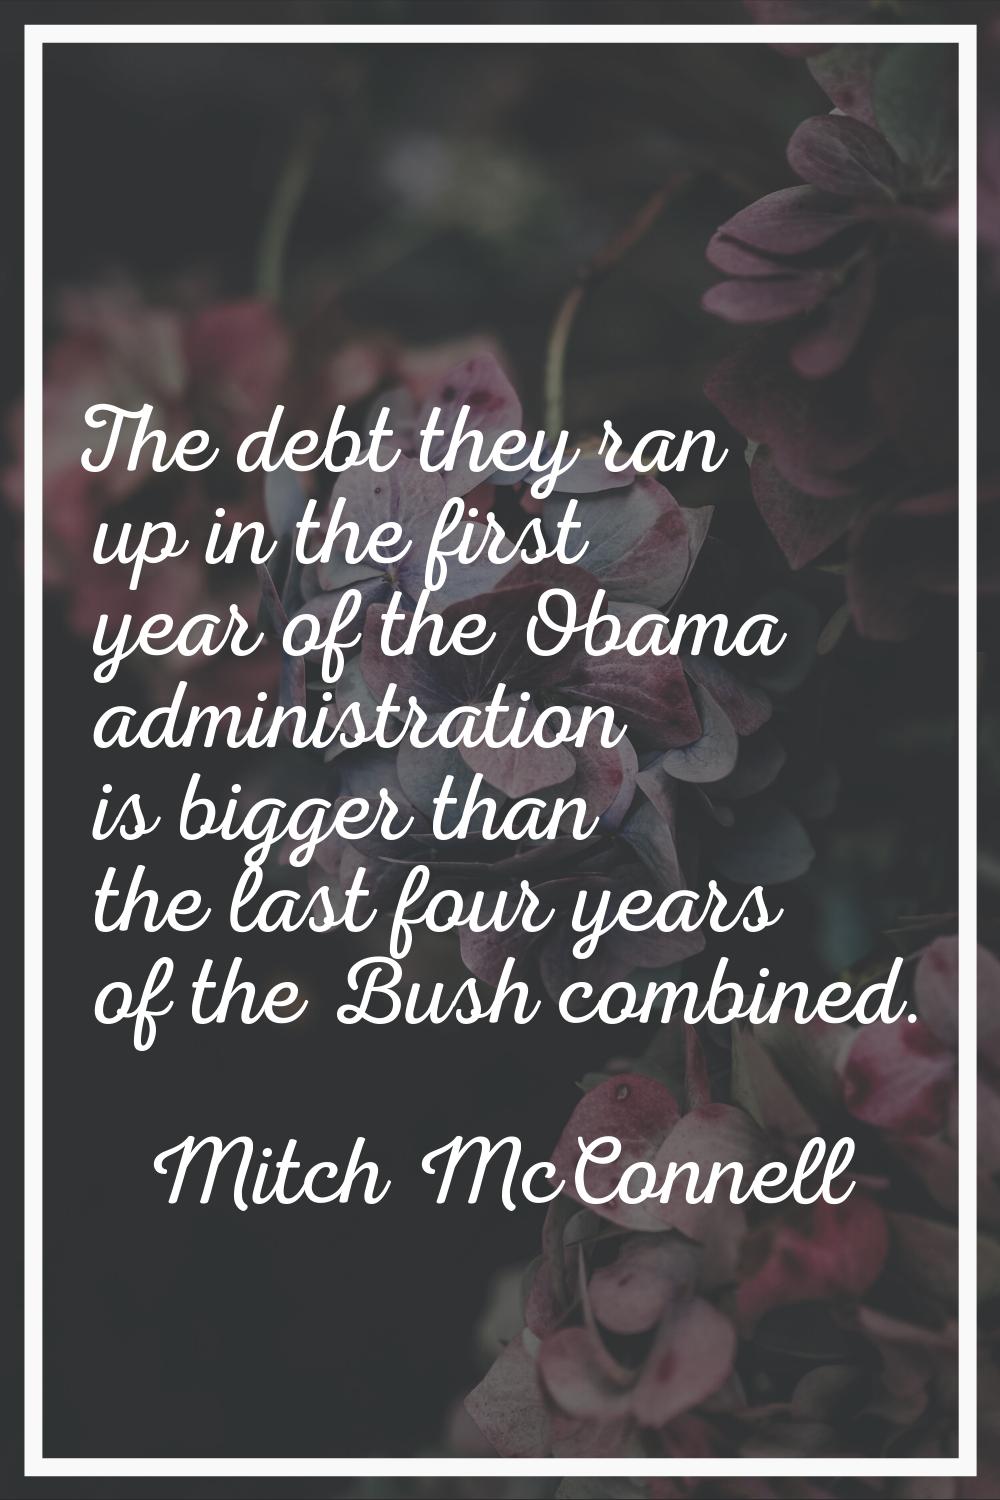 The debt they ran up in the first year of the Obama administration is bigger than the last four yea